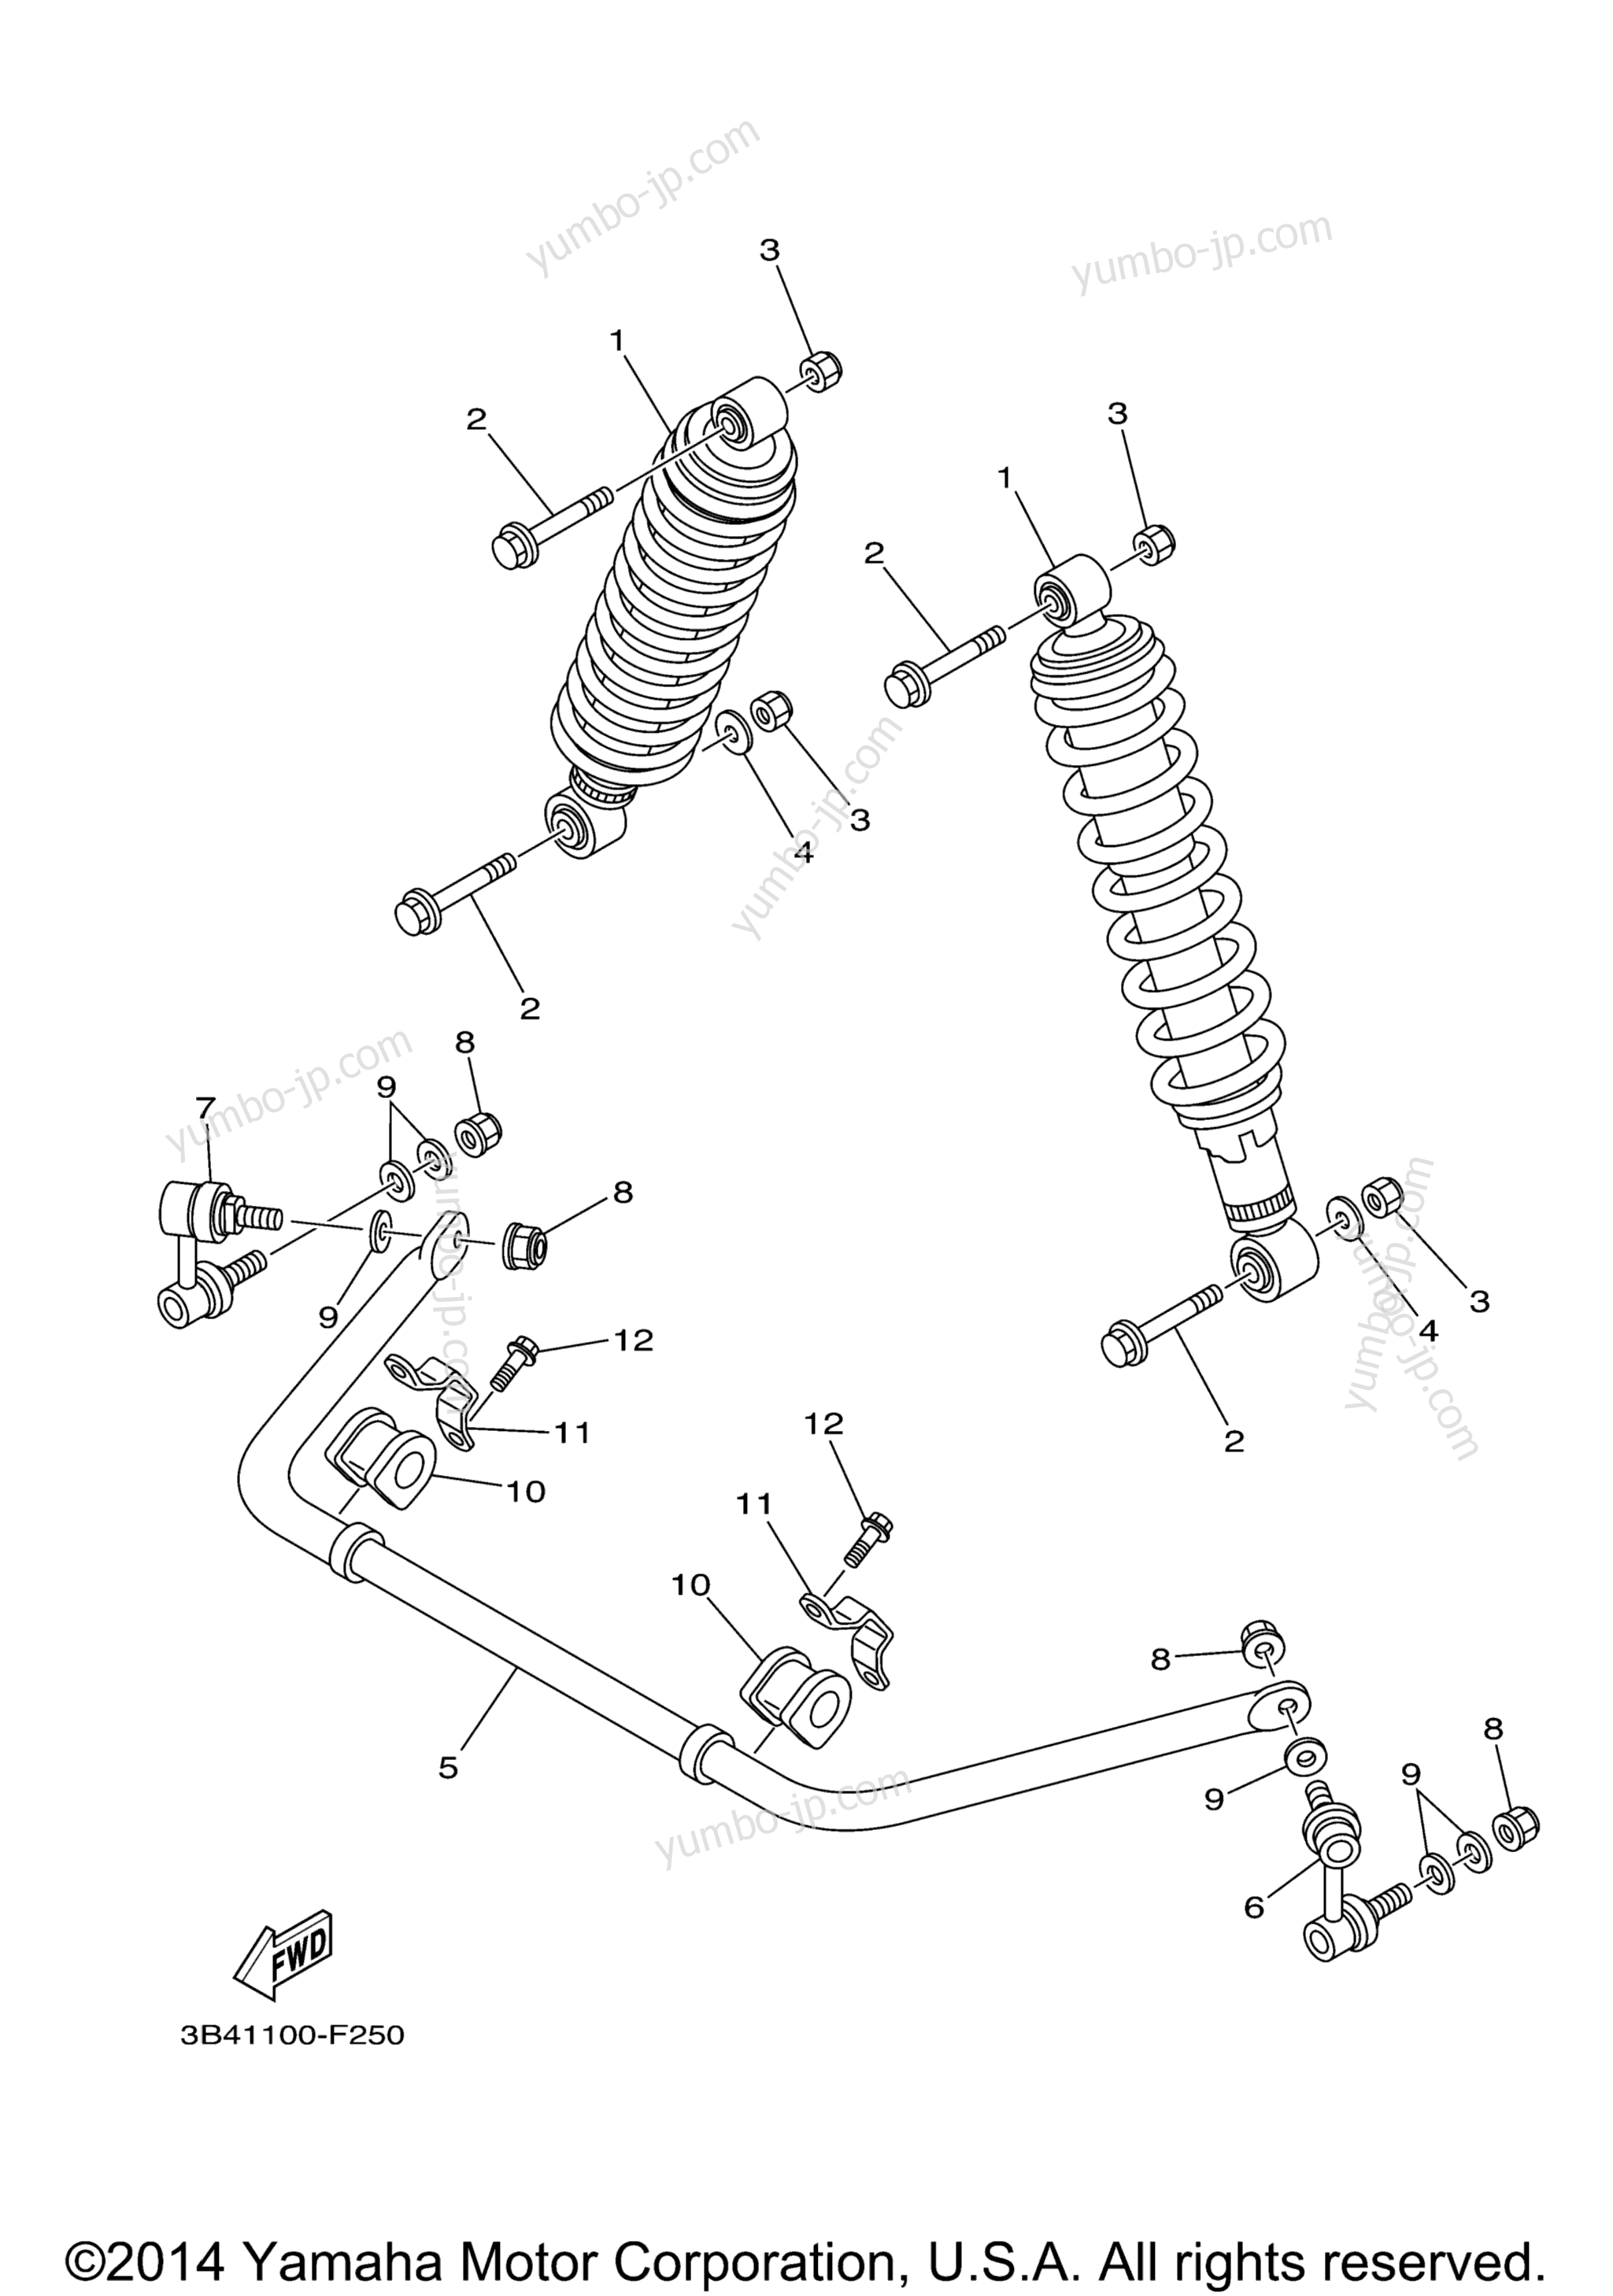 Rear Suspension for ATVs YAMAHA GRIZZLY 700 OUTDOORSMAN EDITION (YFM7FGPOHW) 2007 year